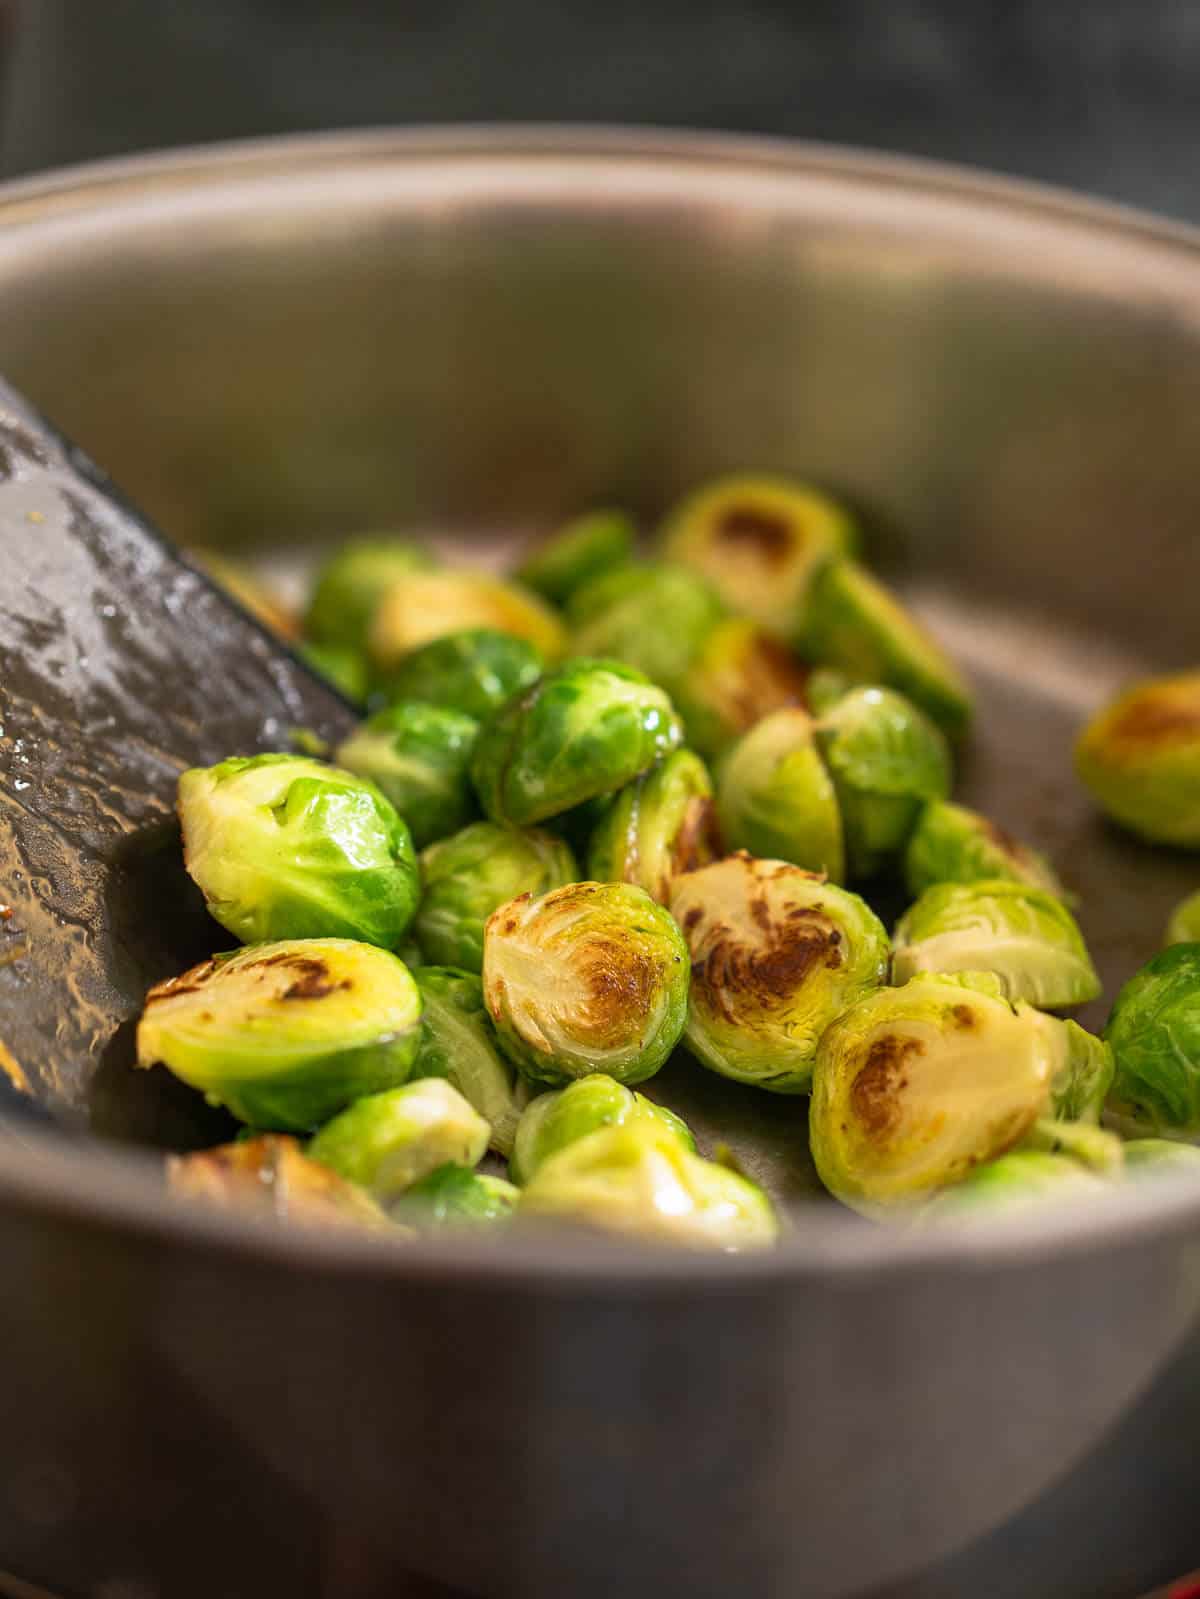 stir with a spatula, trying to keep the sprouts shape and remove as little leaves as possible